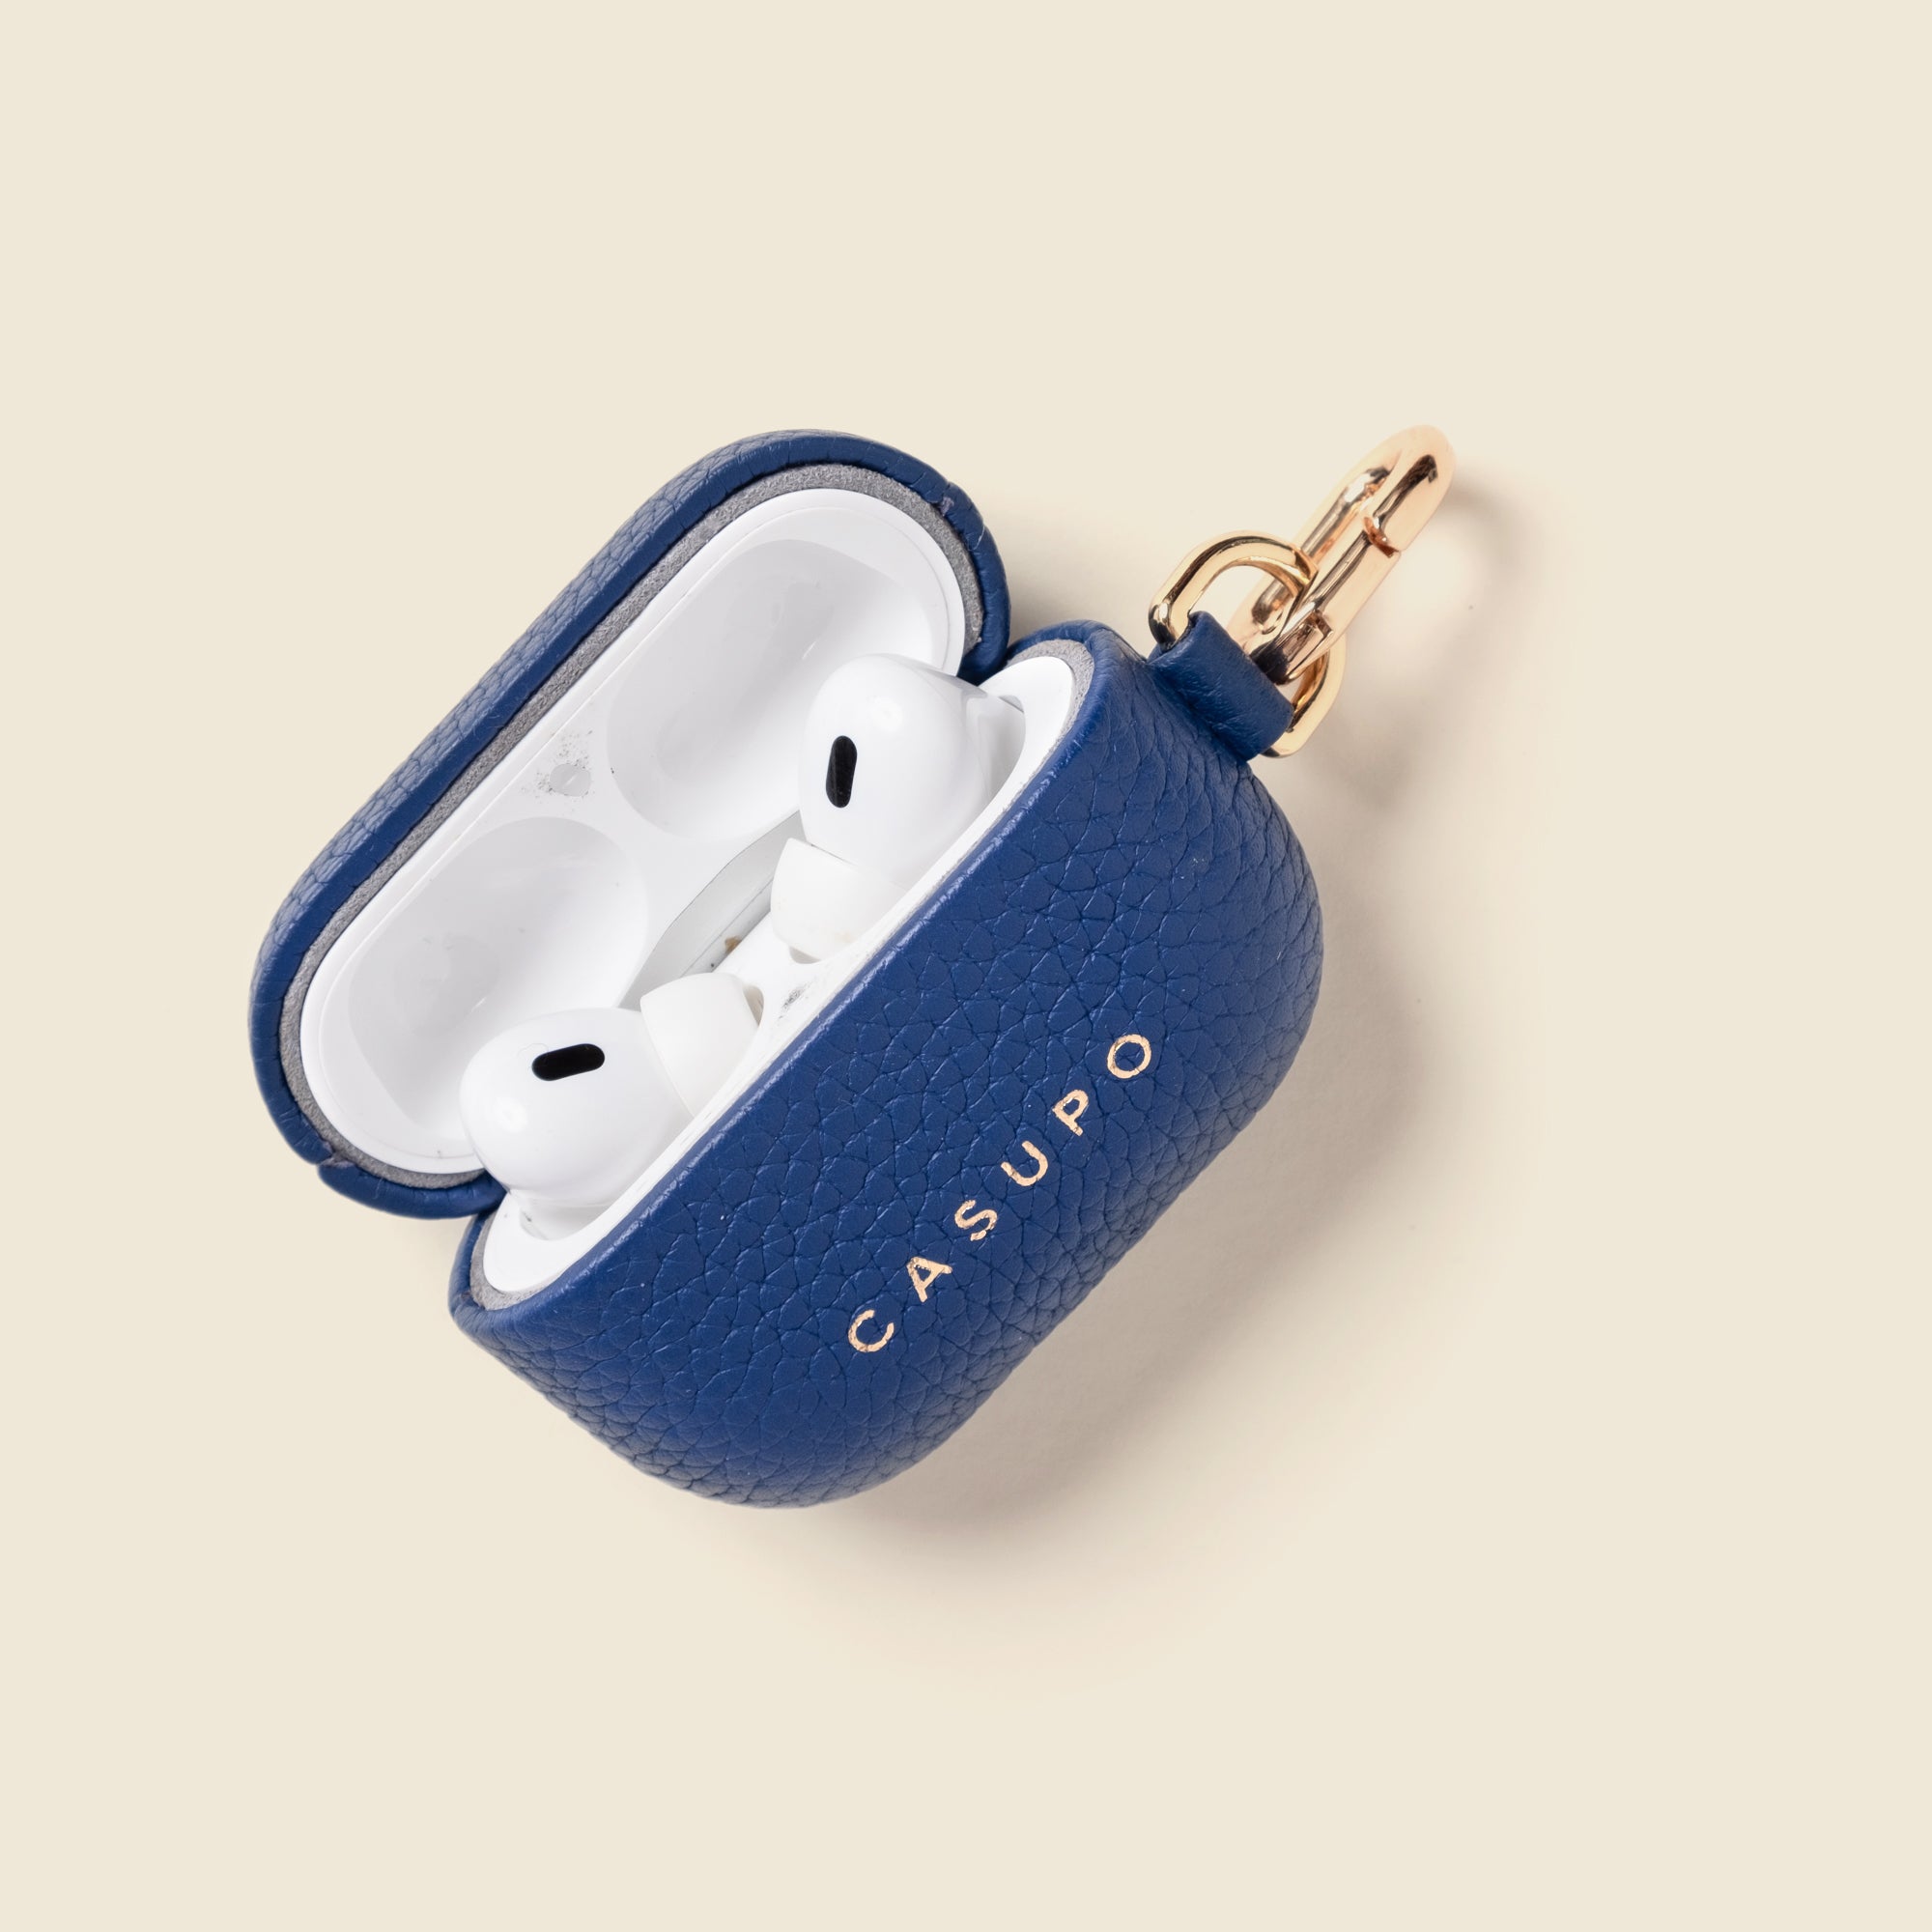 Cobalt blue leather airpod 3rd Generation and Airpod pro 2 case with key ring